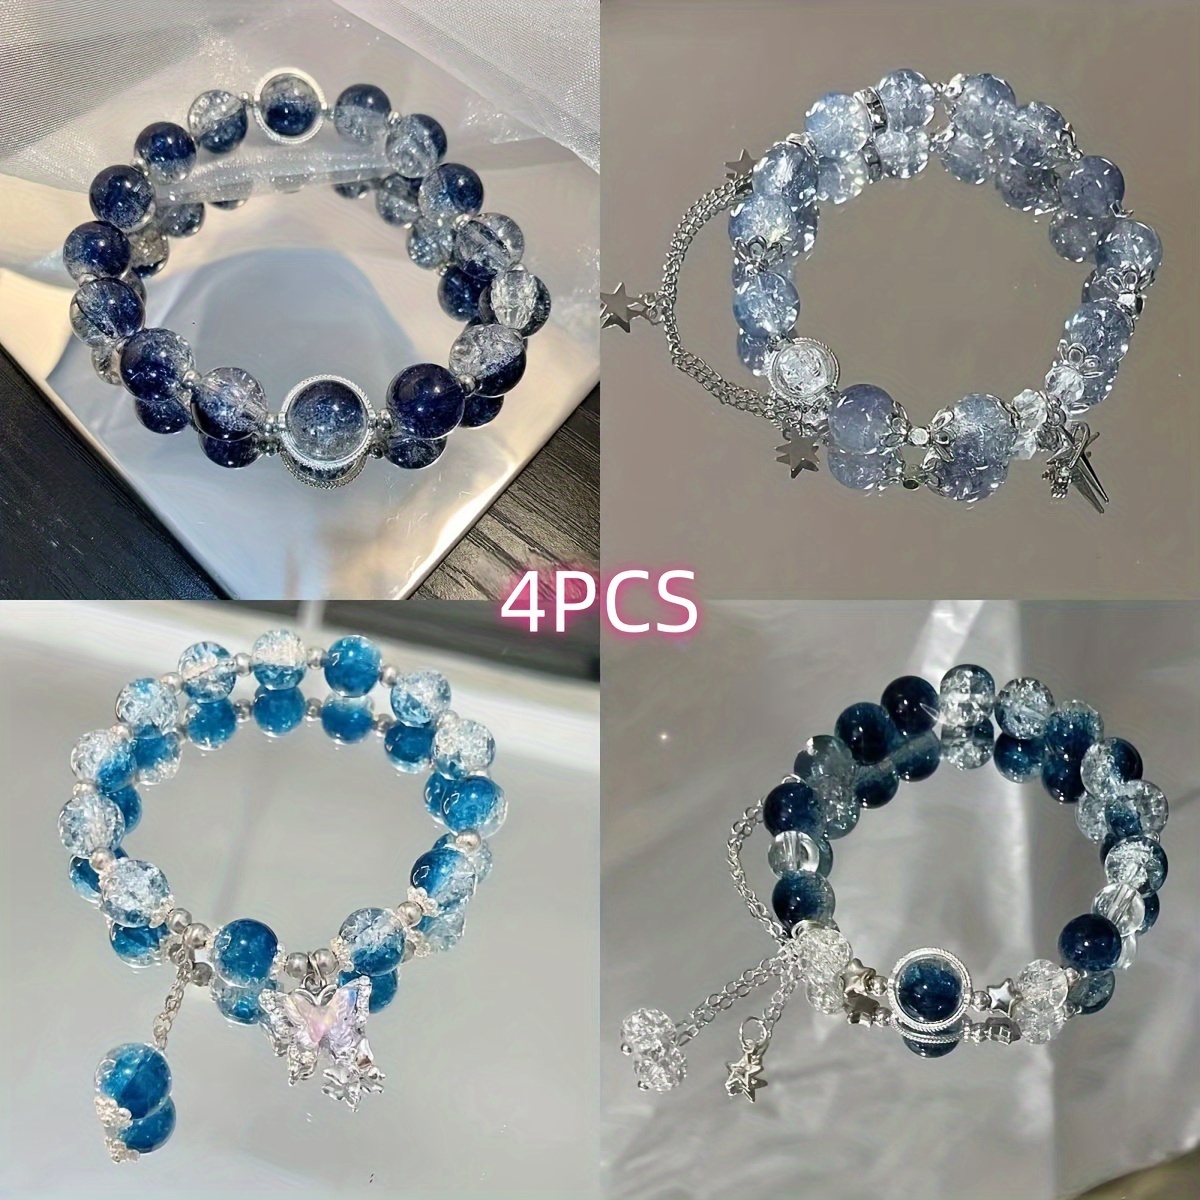 

4pcs Beaded Bracelets For Men & Women, Elegant & Luxurious With Shiny Stars Charm, Perfect For All Occasions, Stylish Accessory Gifts For Eid